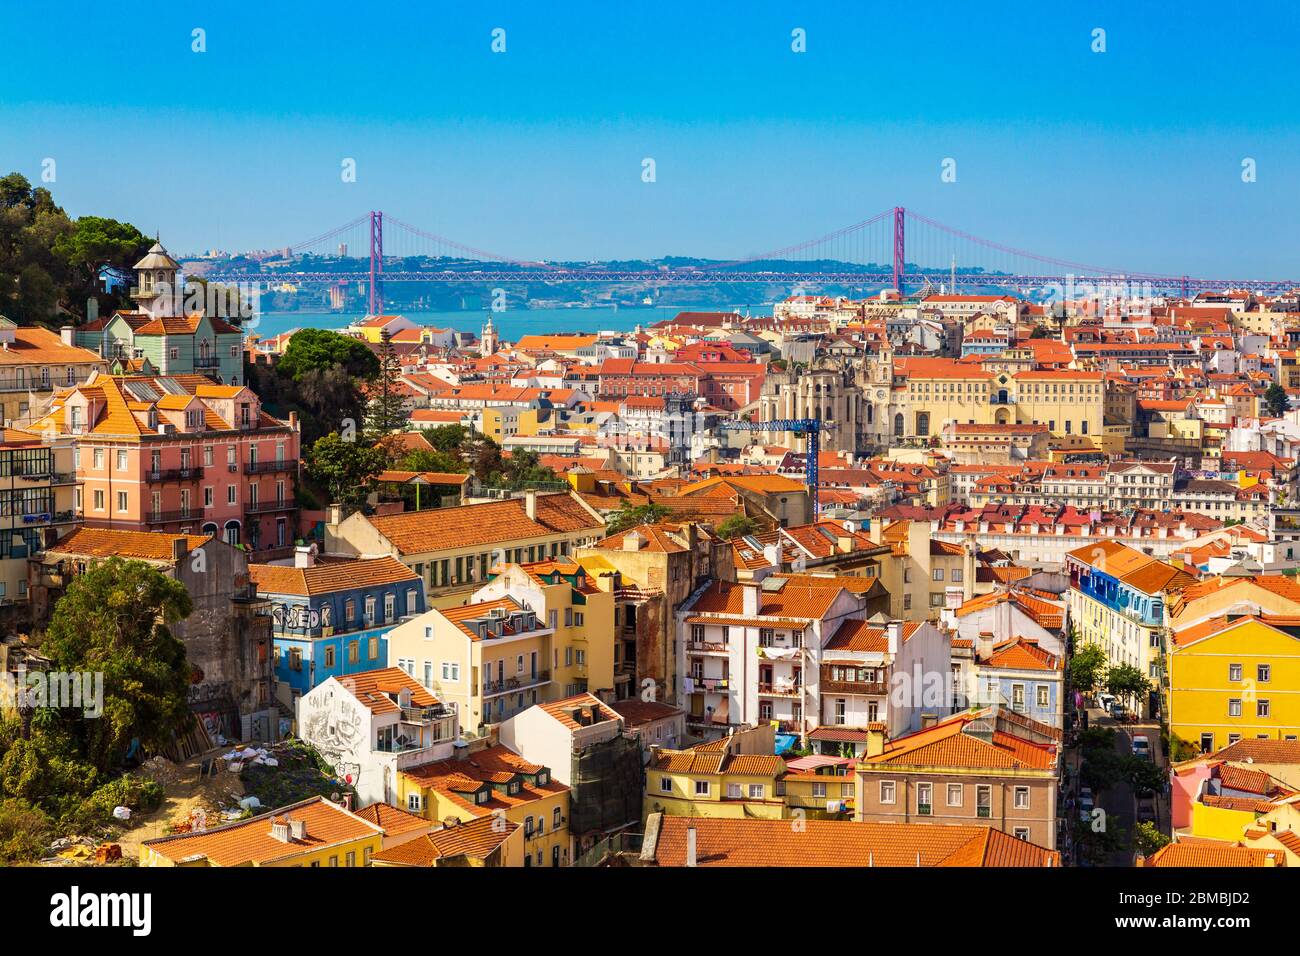 Panorama of Lisbon old town viewed from Miradouro da Graca observation point, Portugal Stock Photo